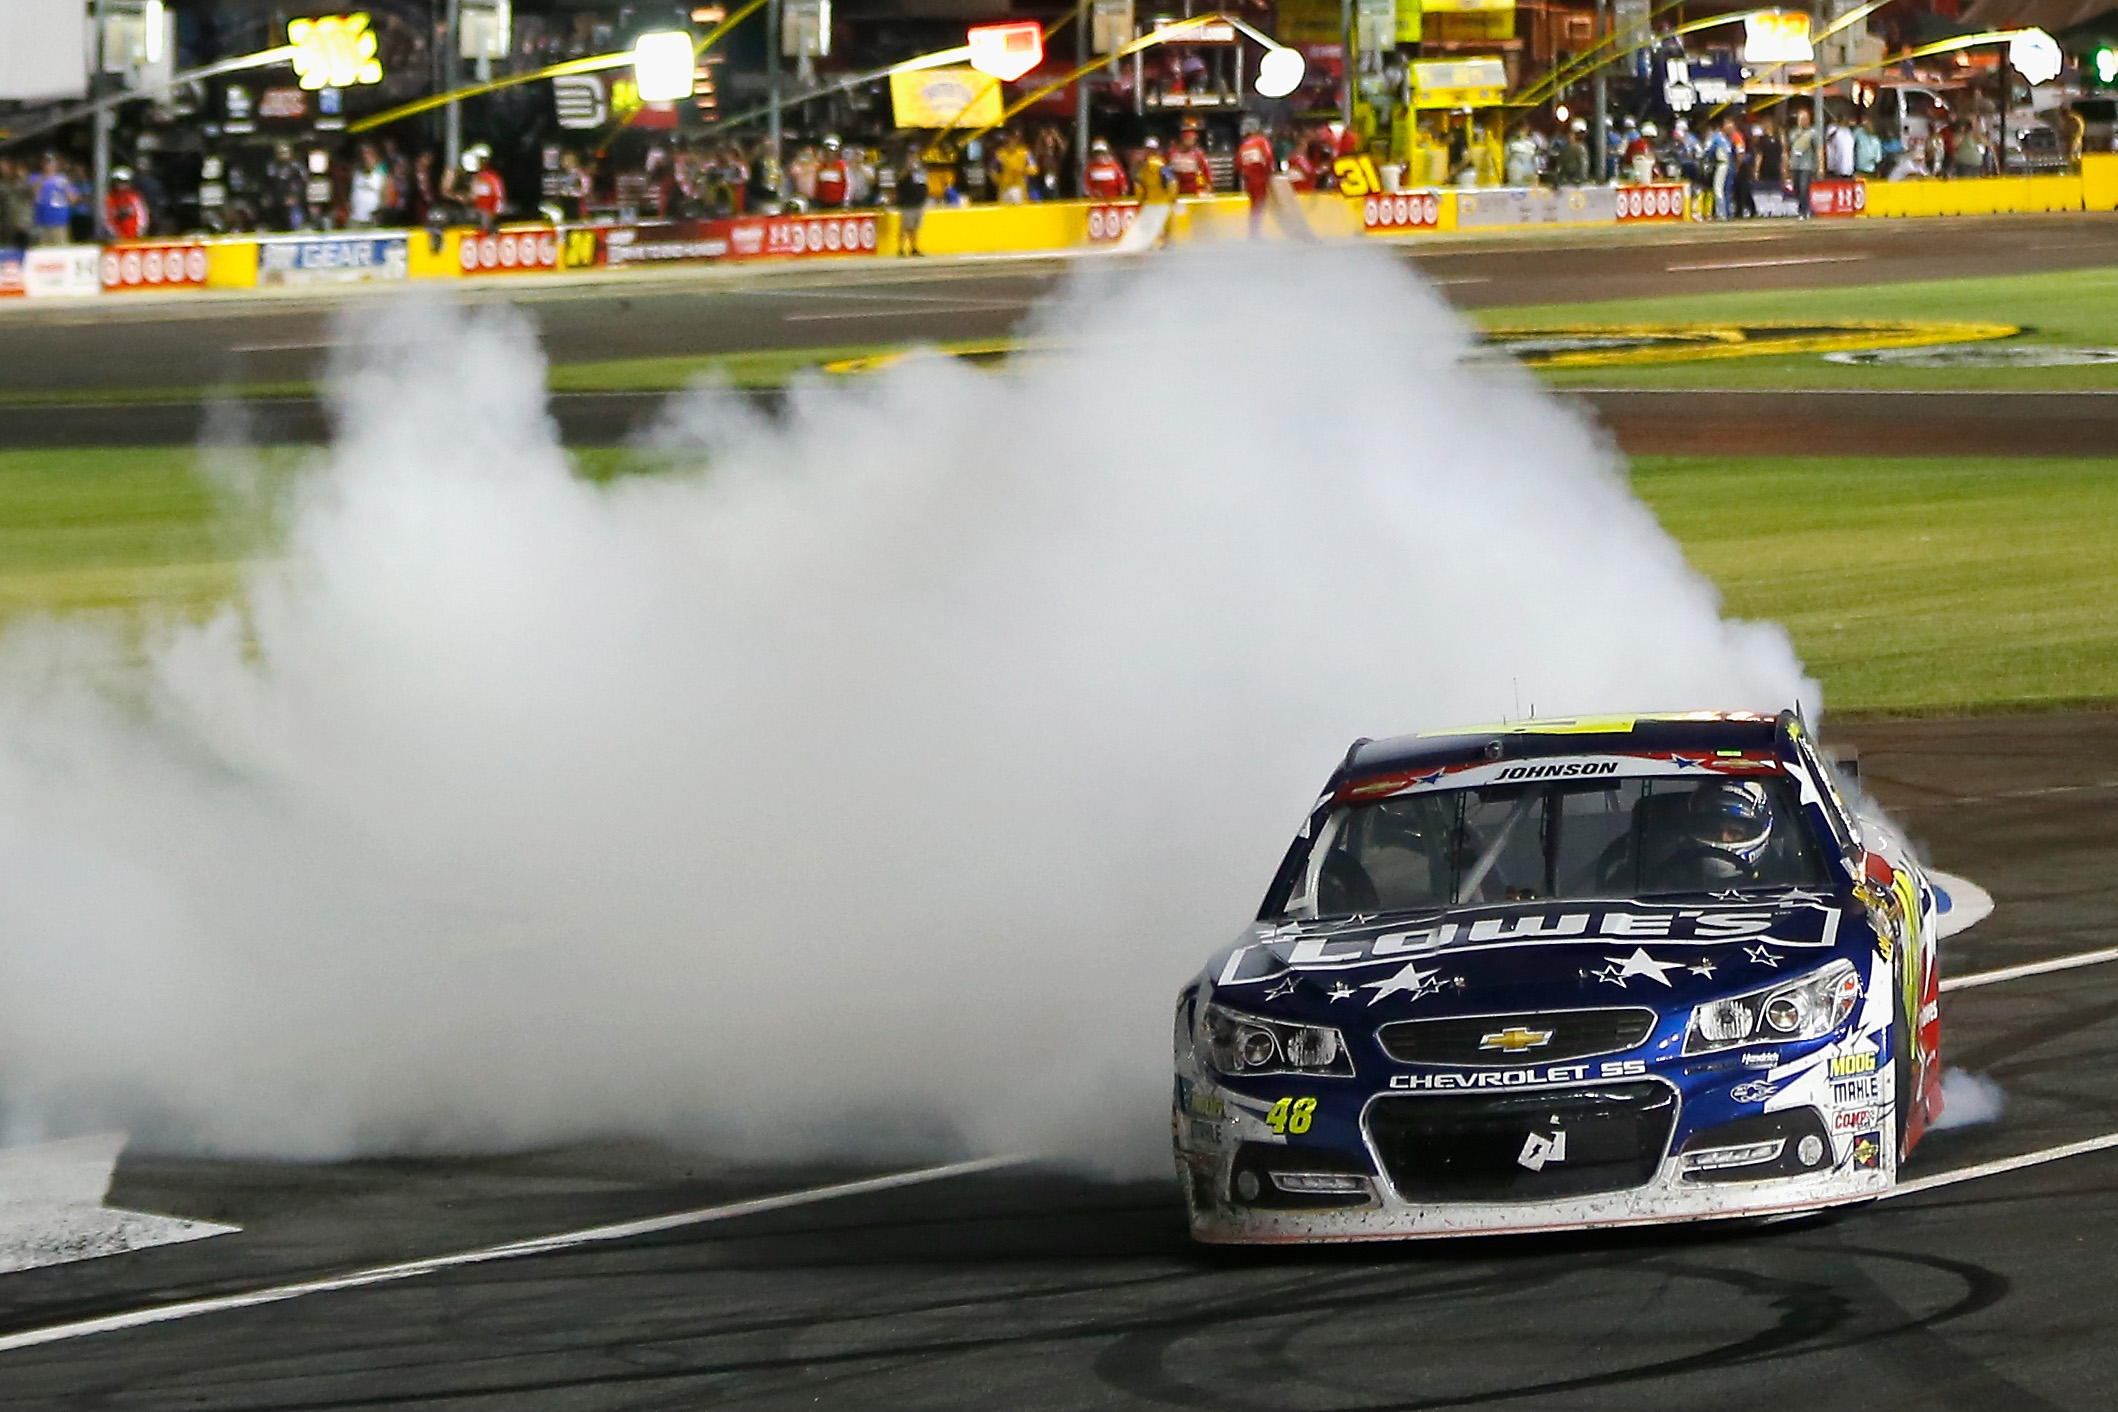 It was only a matter of time before this guy found victory lane in 2014.